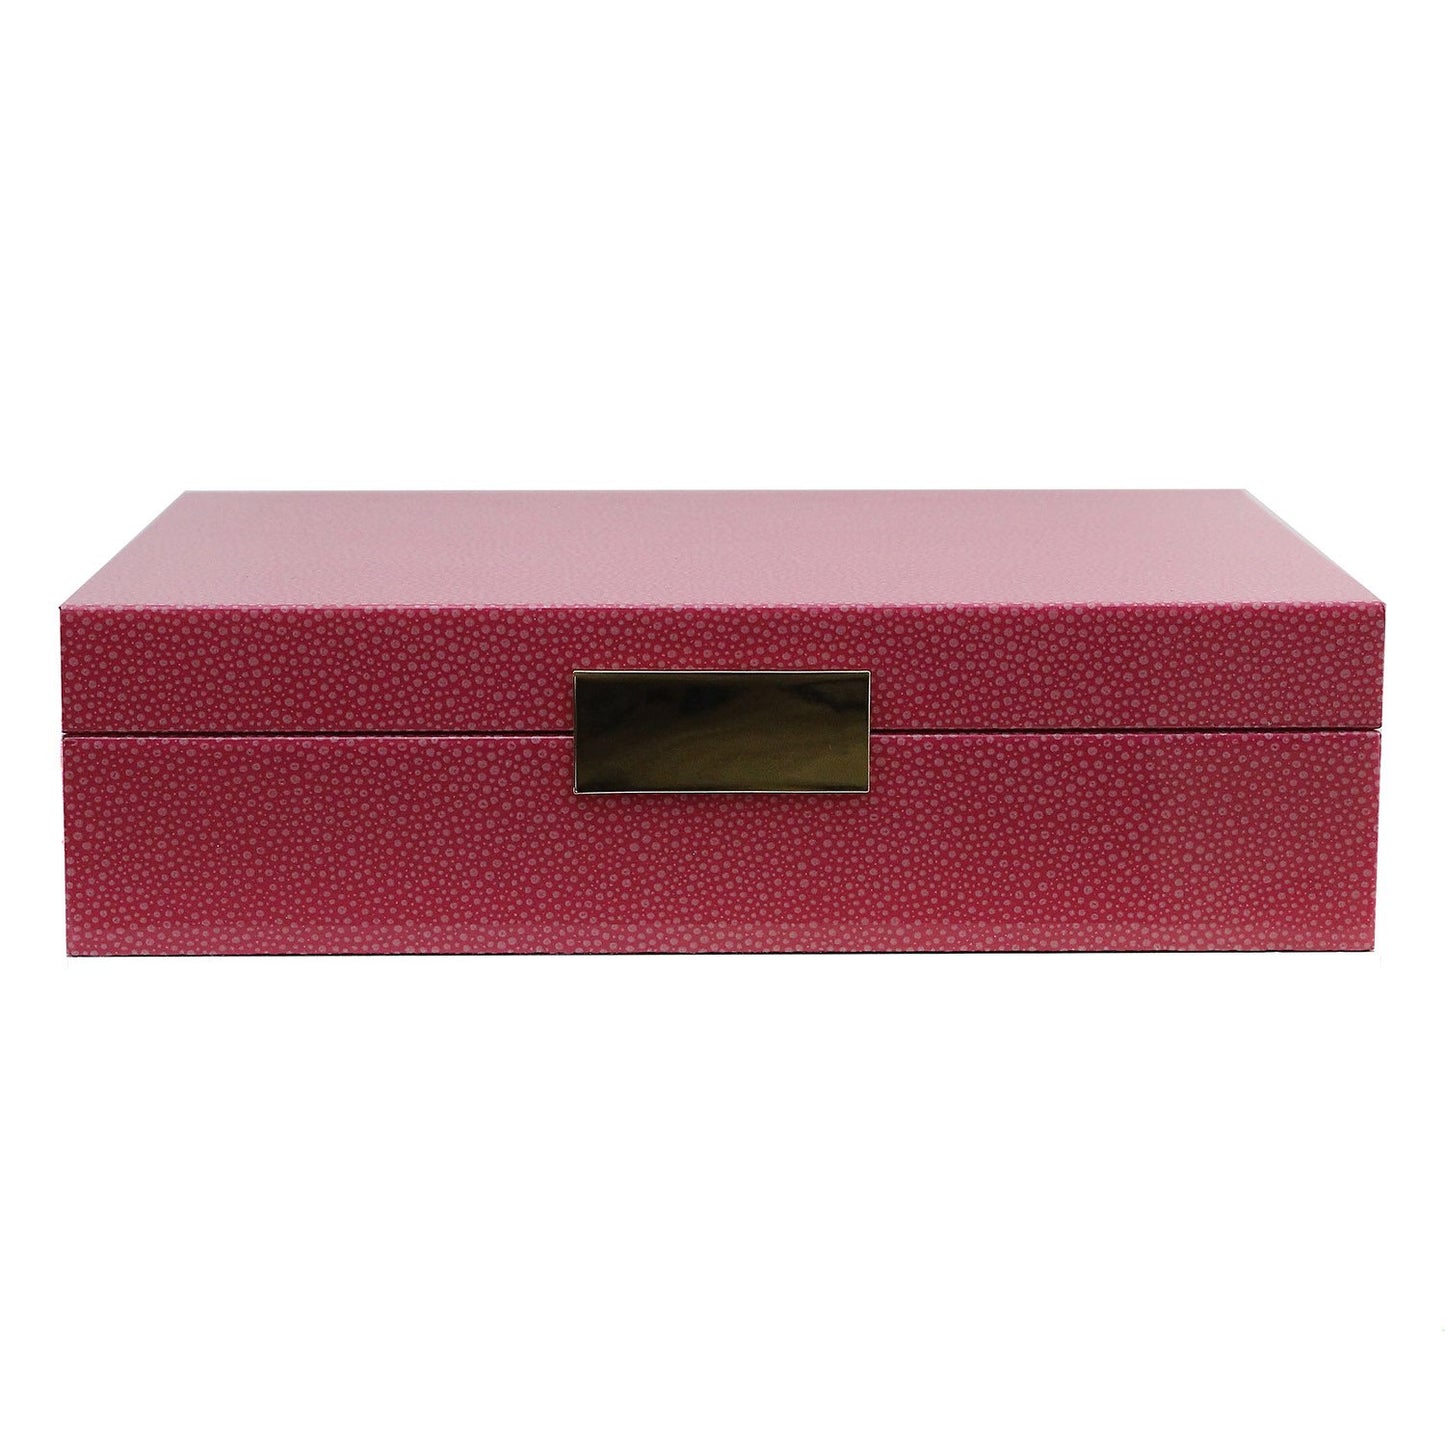 Large pink watch box with gold plated clasp